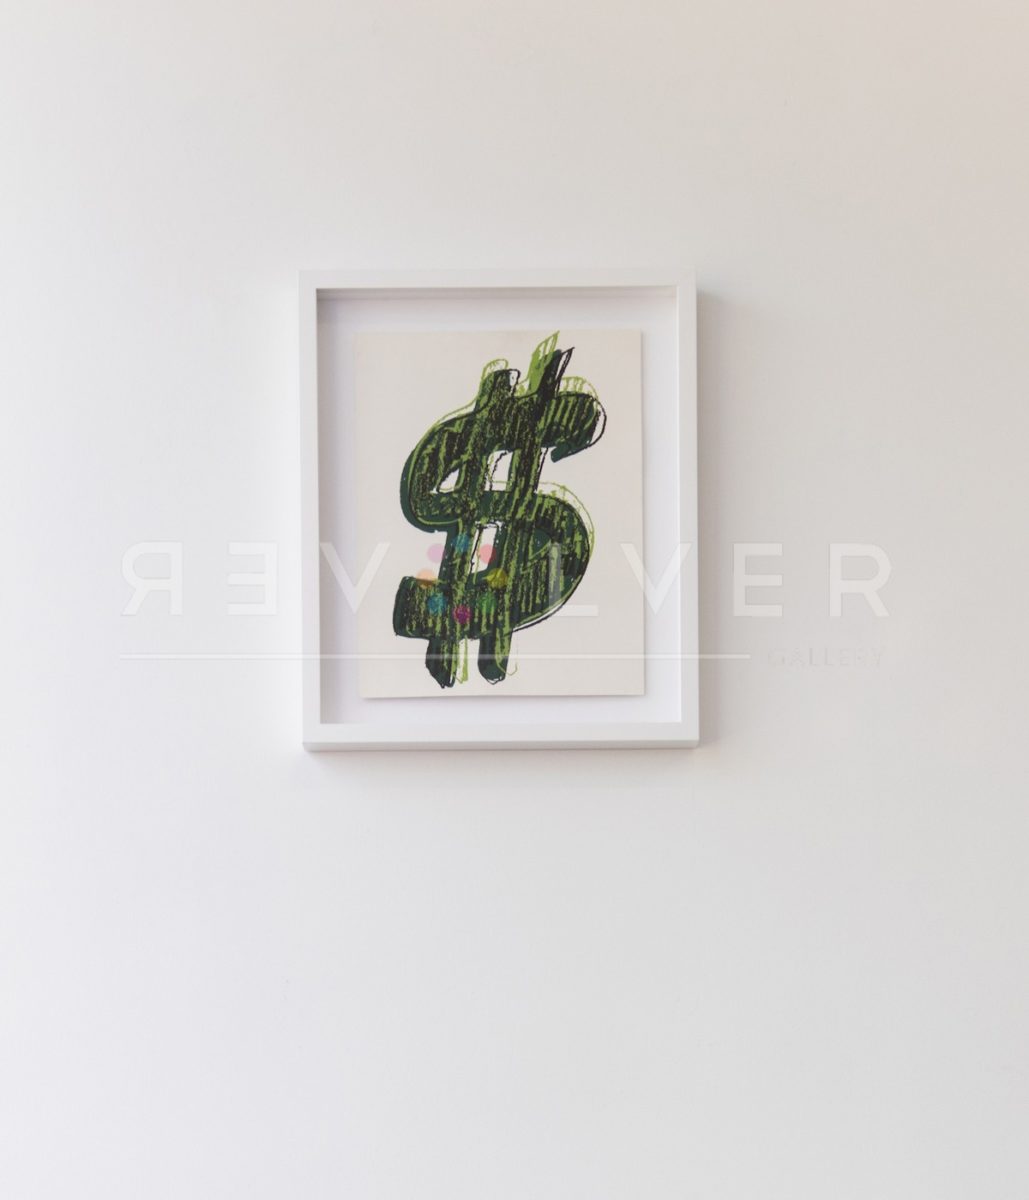 Dollar Sign 278 screenprint framed and hanging on the wall.